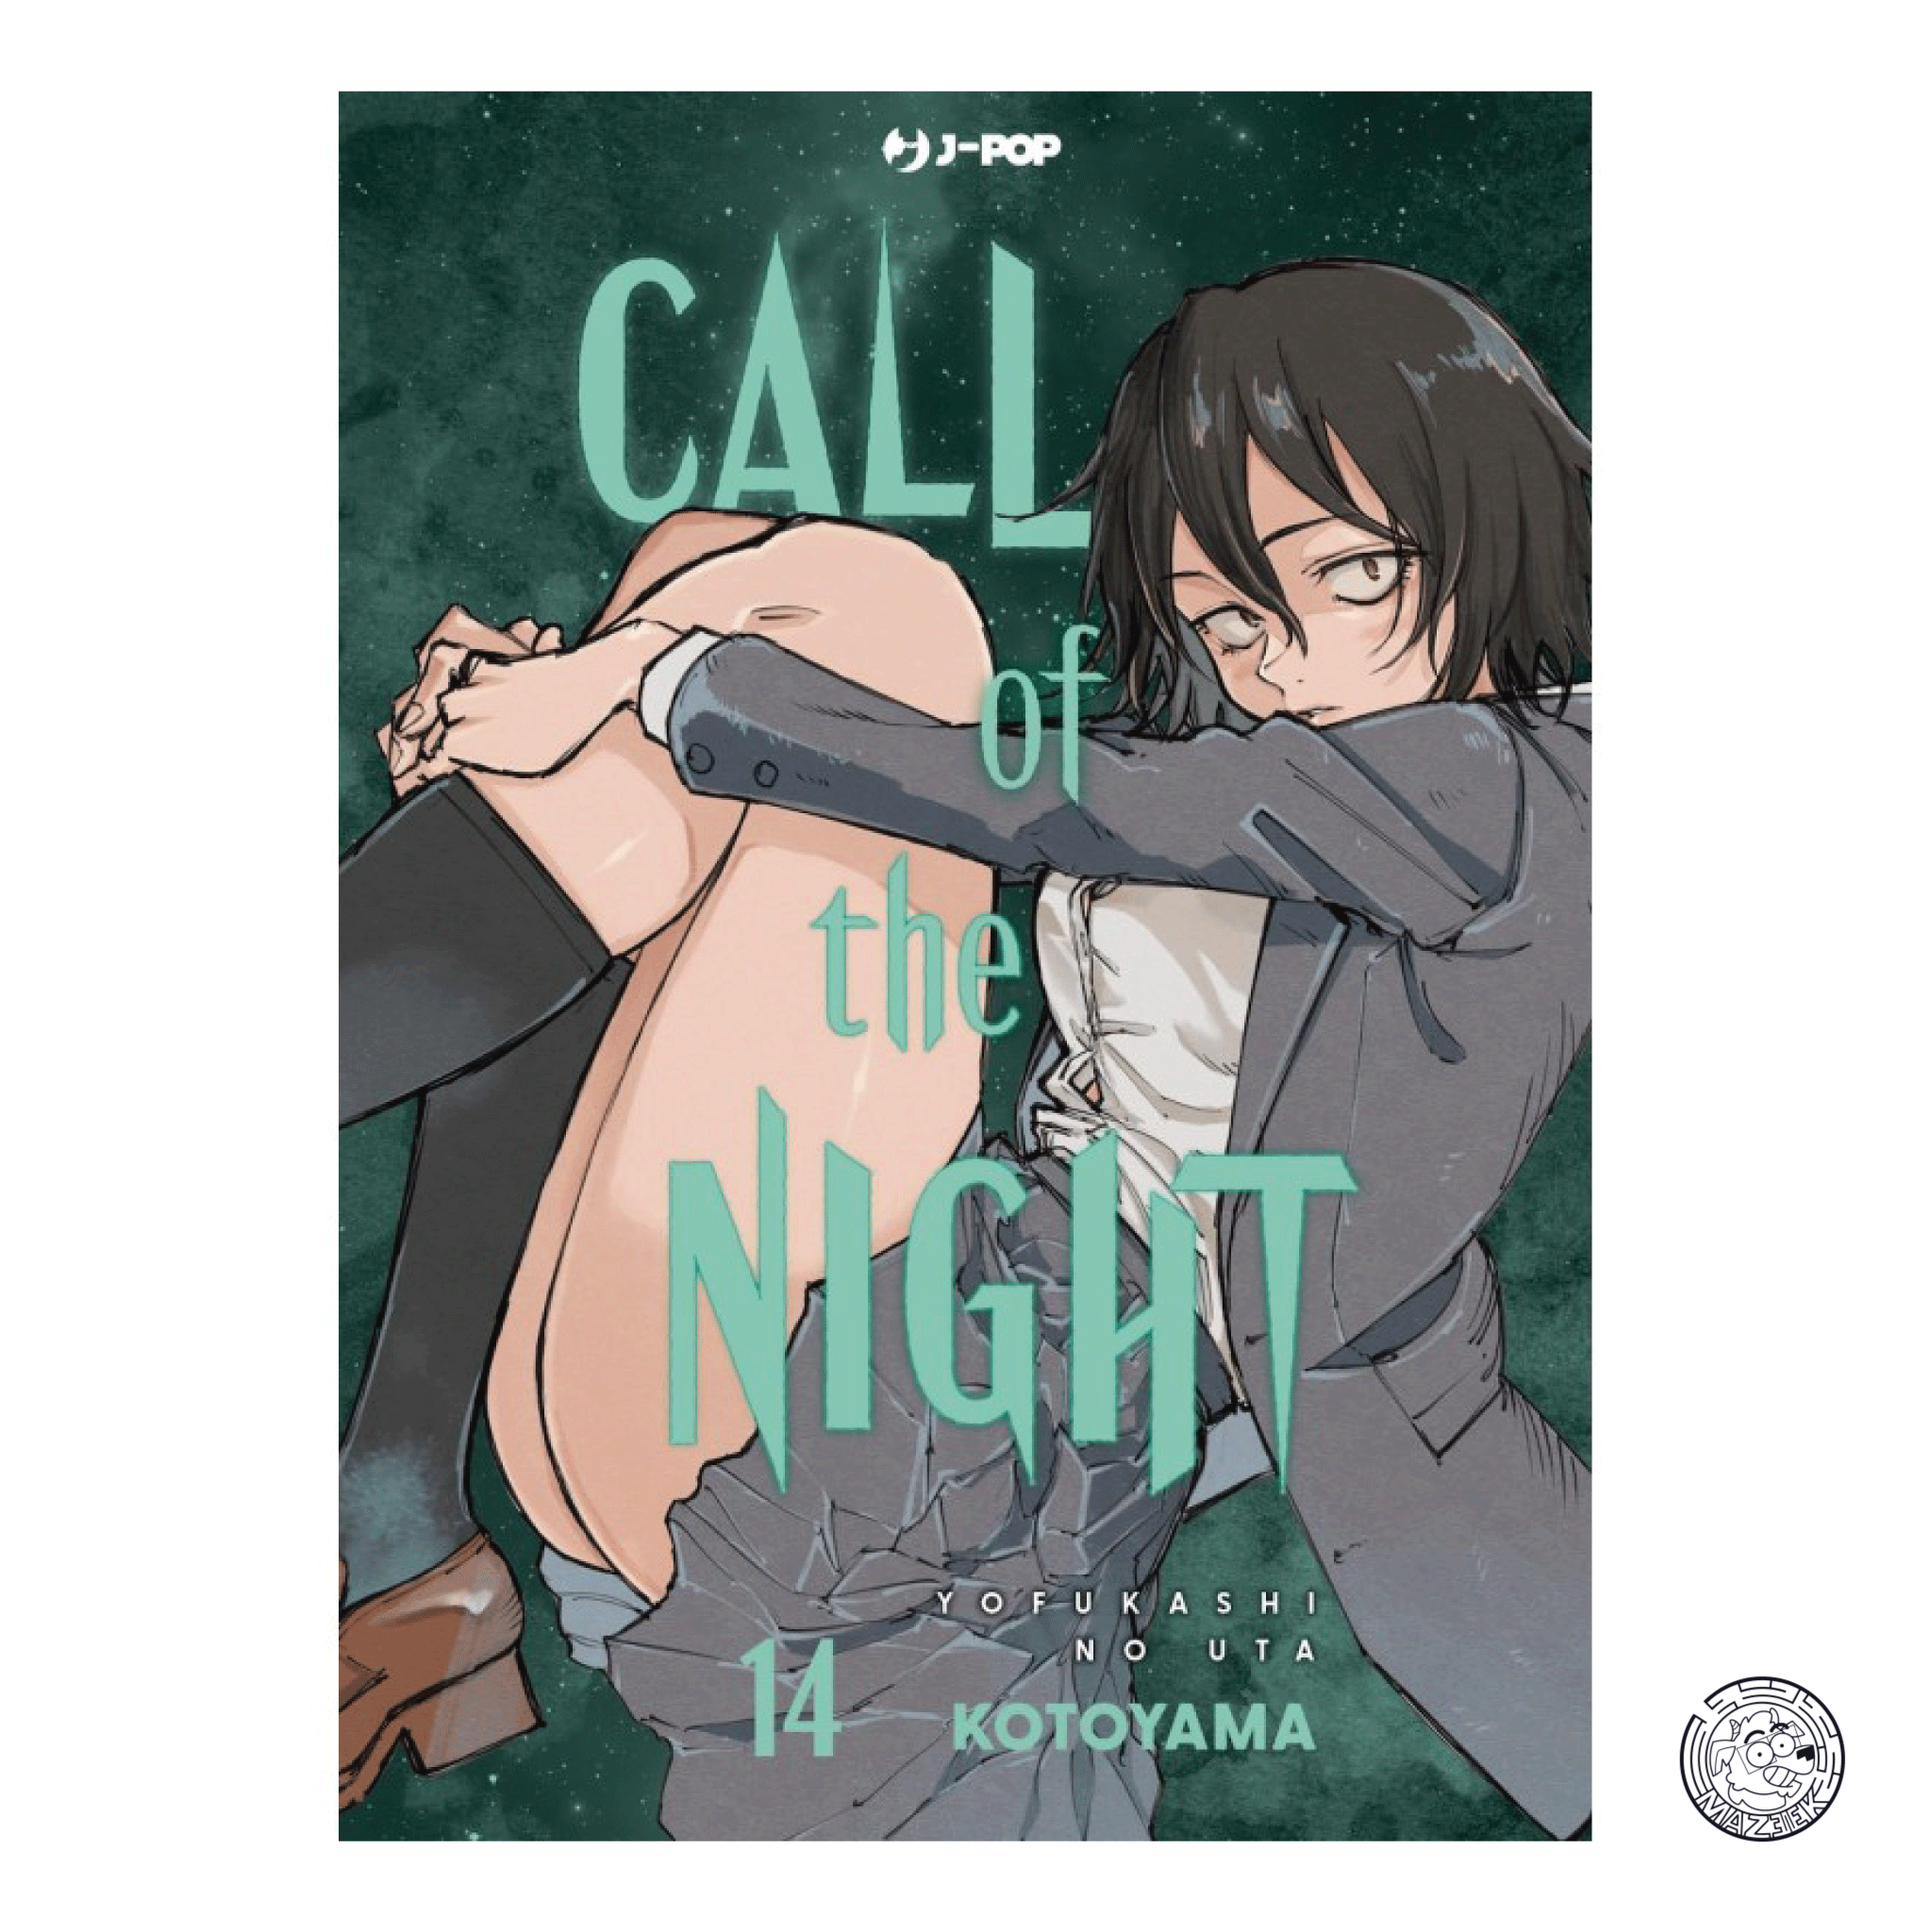 Call of the Night 14